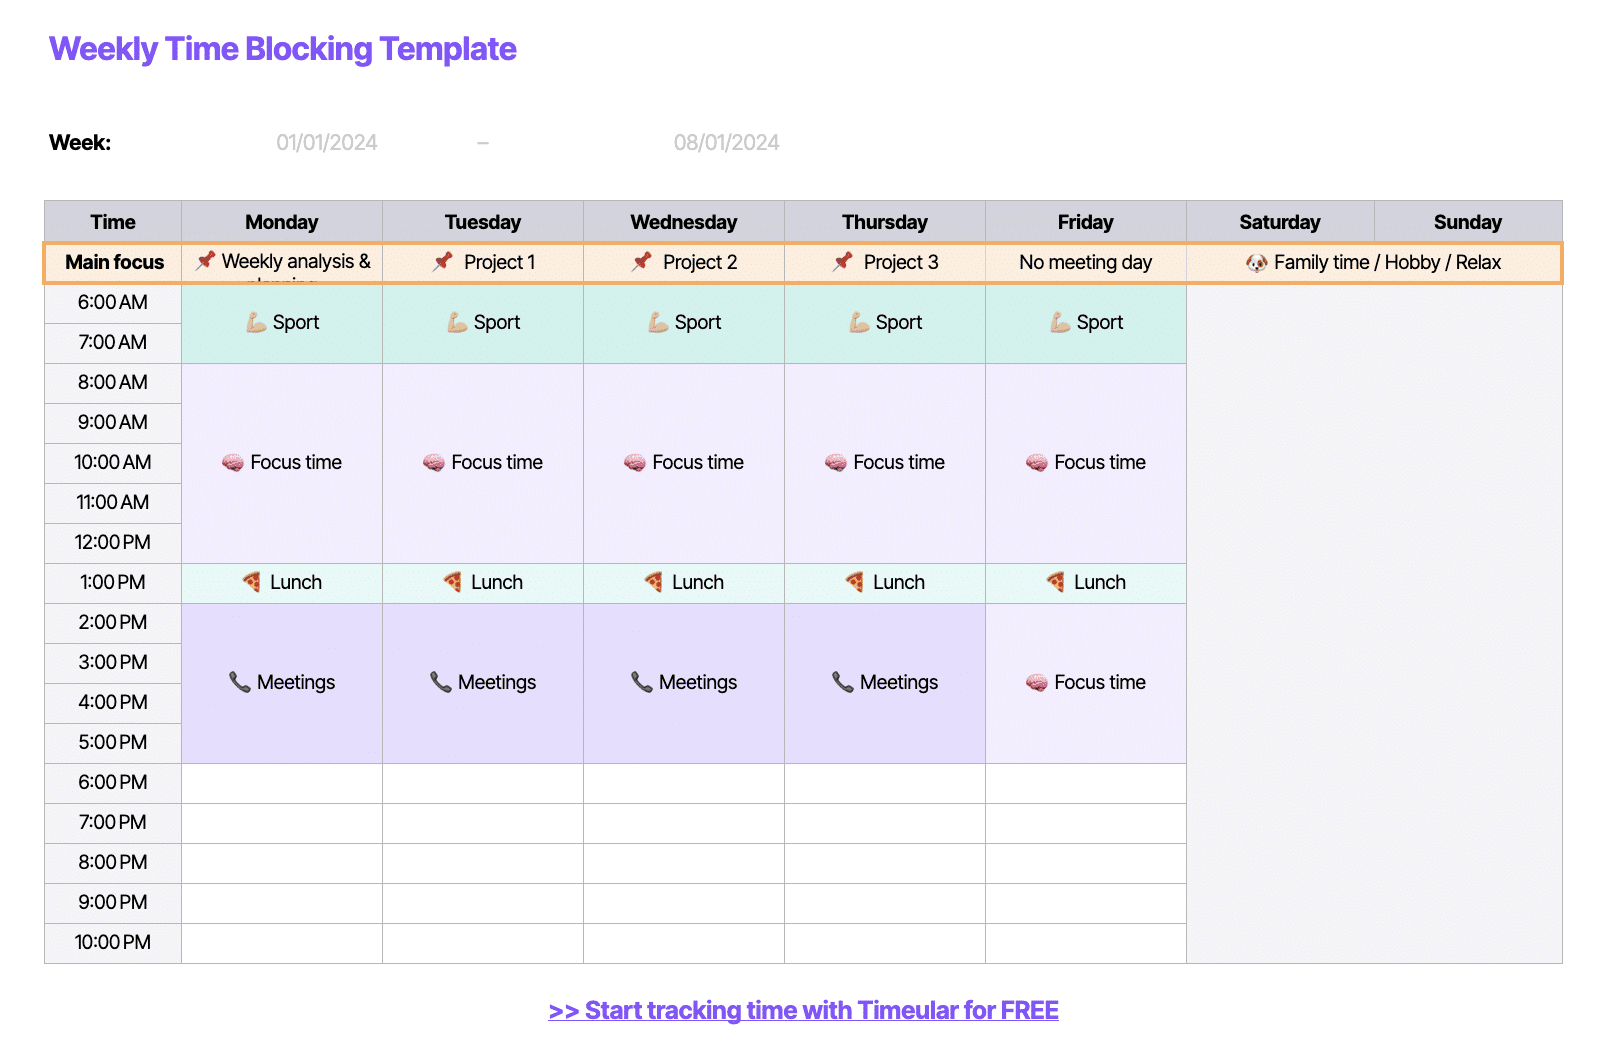 google sheets monthly expense tracker template